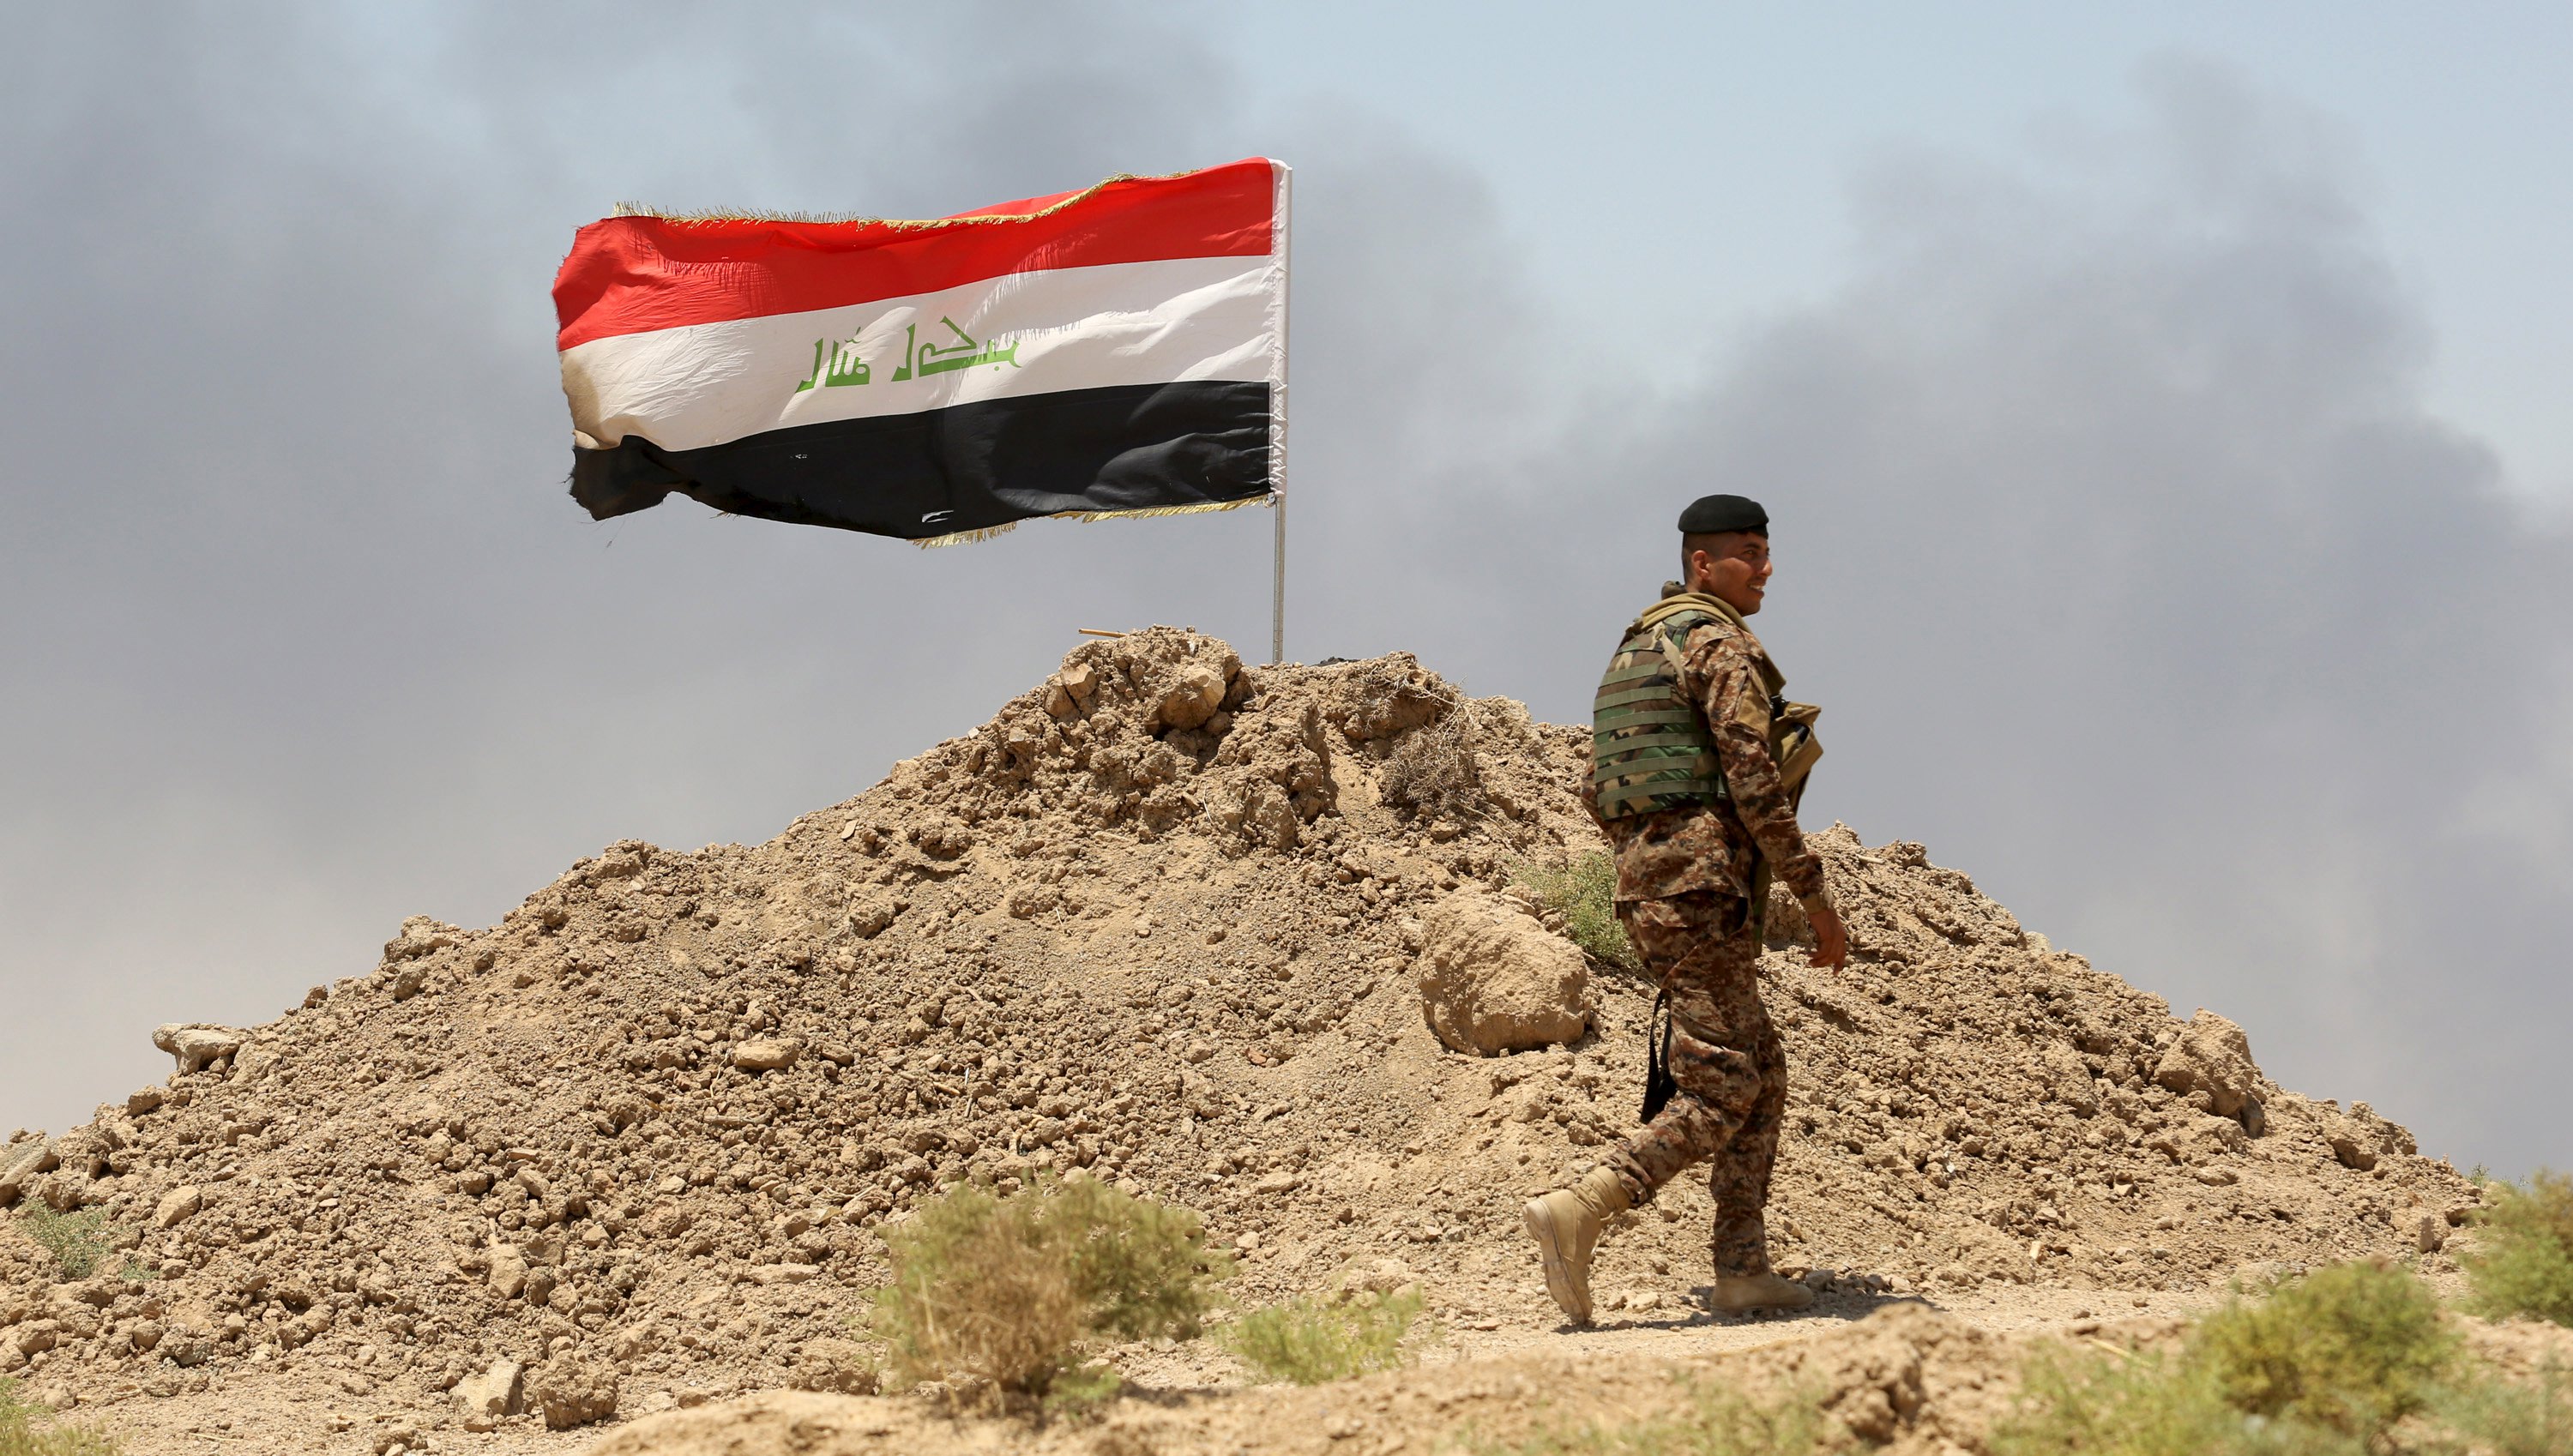 Iraqi security forces and Sunni tribal fighters in Anbar province in Iraq have been battling to dislodge the Islamic State militants in the region. Photo: Reuters